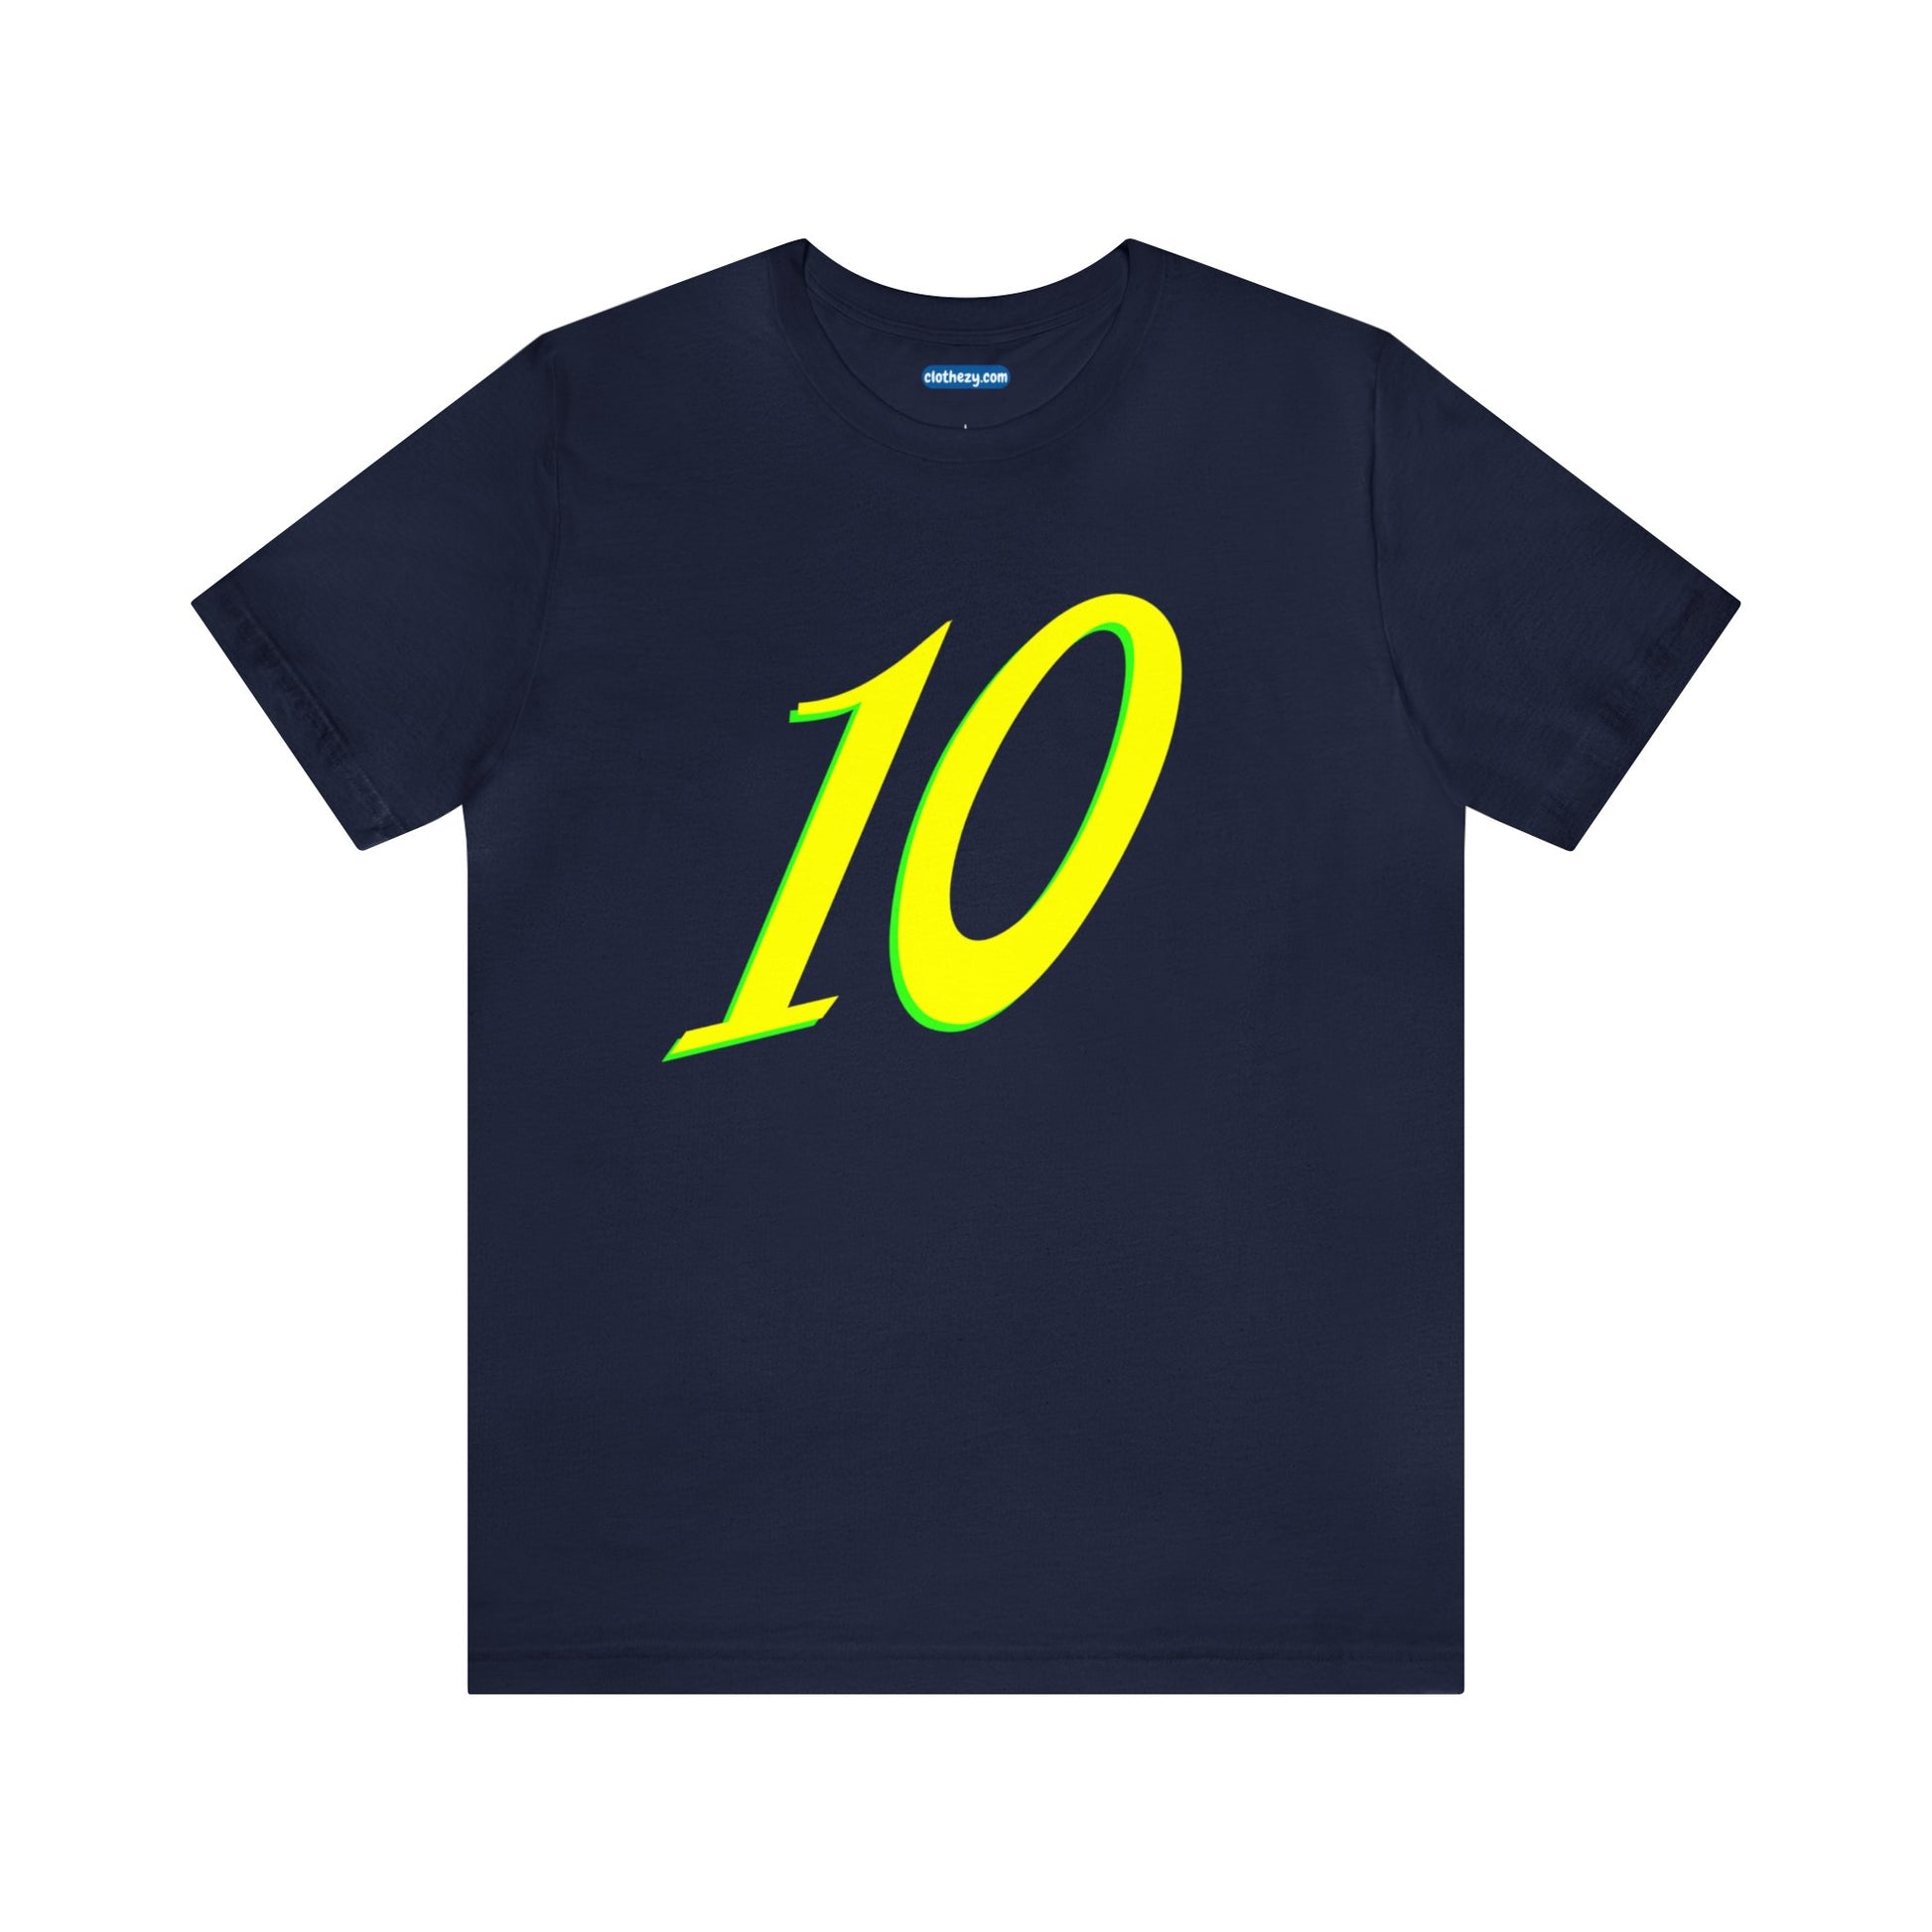 Number 10 Design - Soft Cotton Tee for birthdays and celebrations, Gift for friends and family, Multiple Options by clothezy.com in Navy Size Small - Buy Now